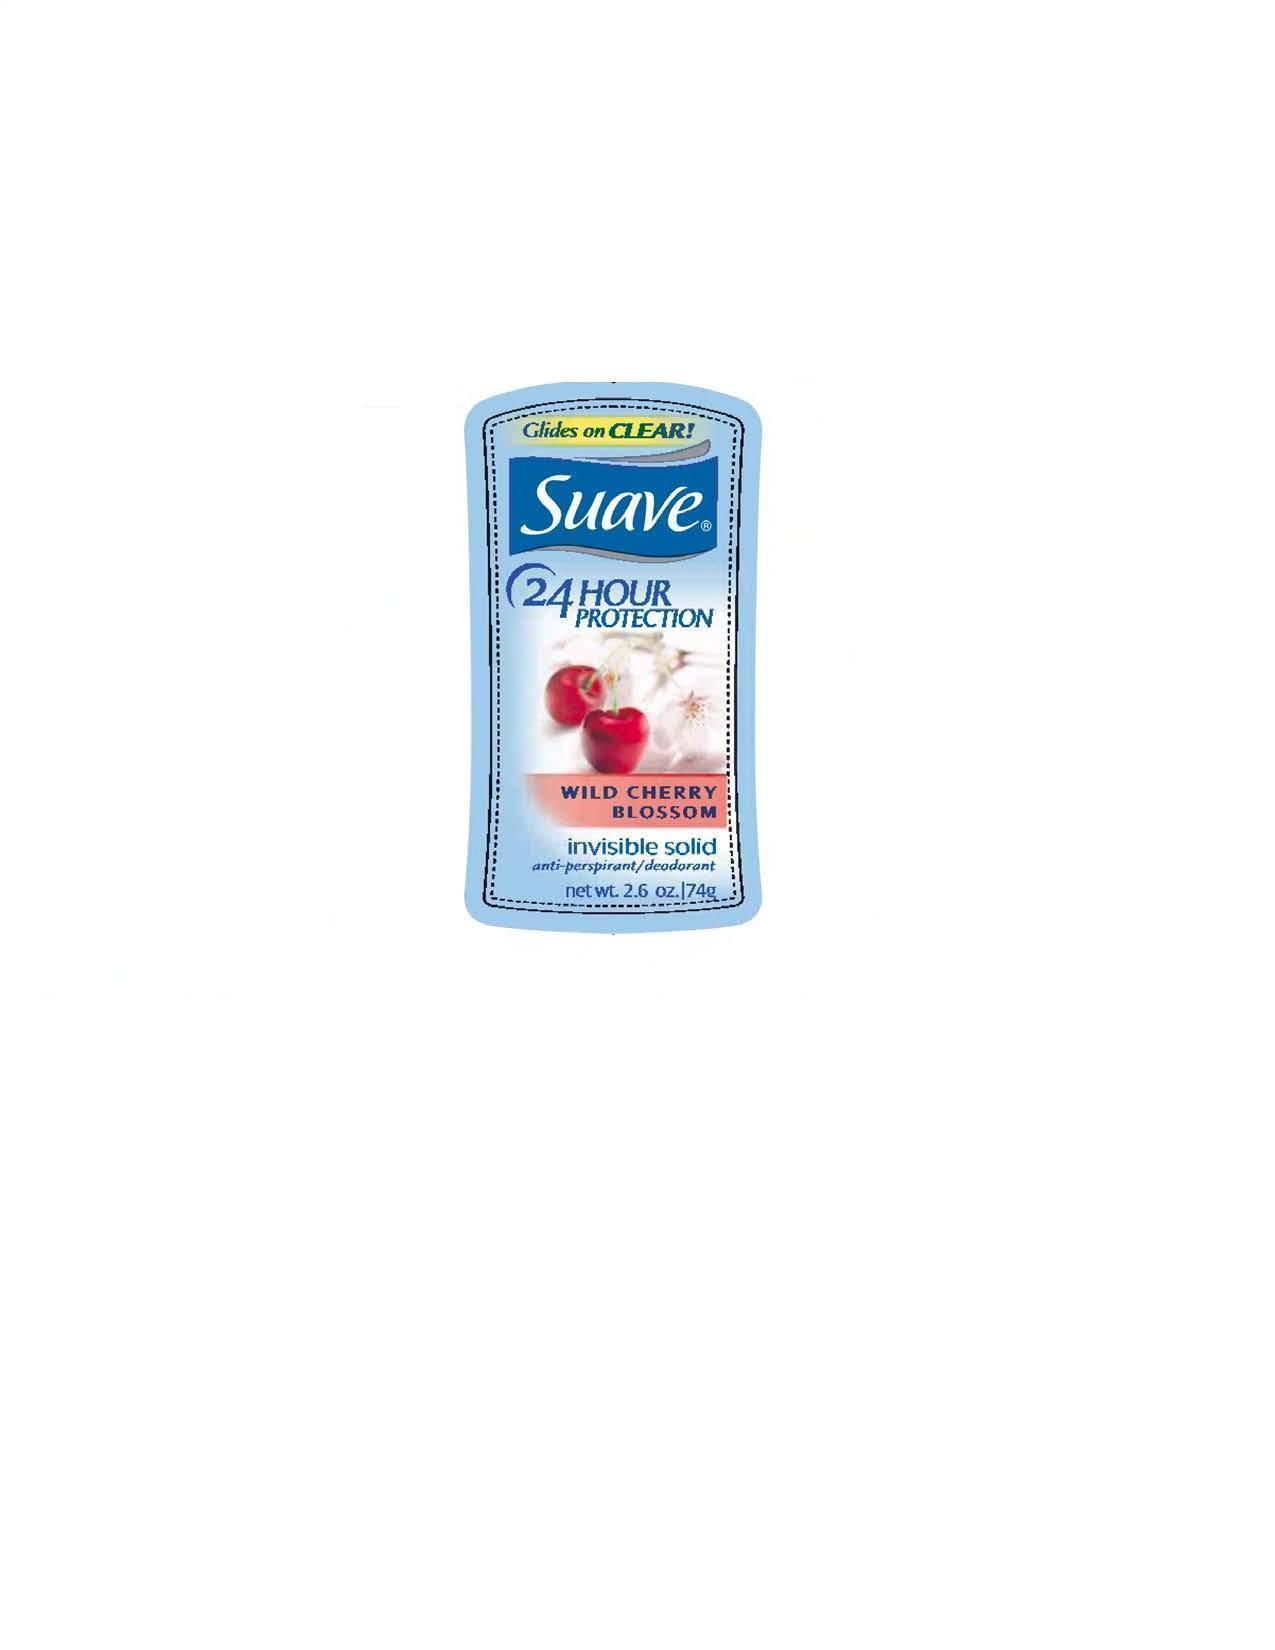 Suave Wild Cherry Blossom 2.6 oz PDP front